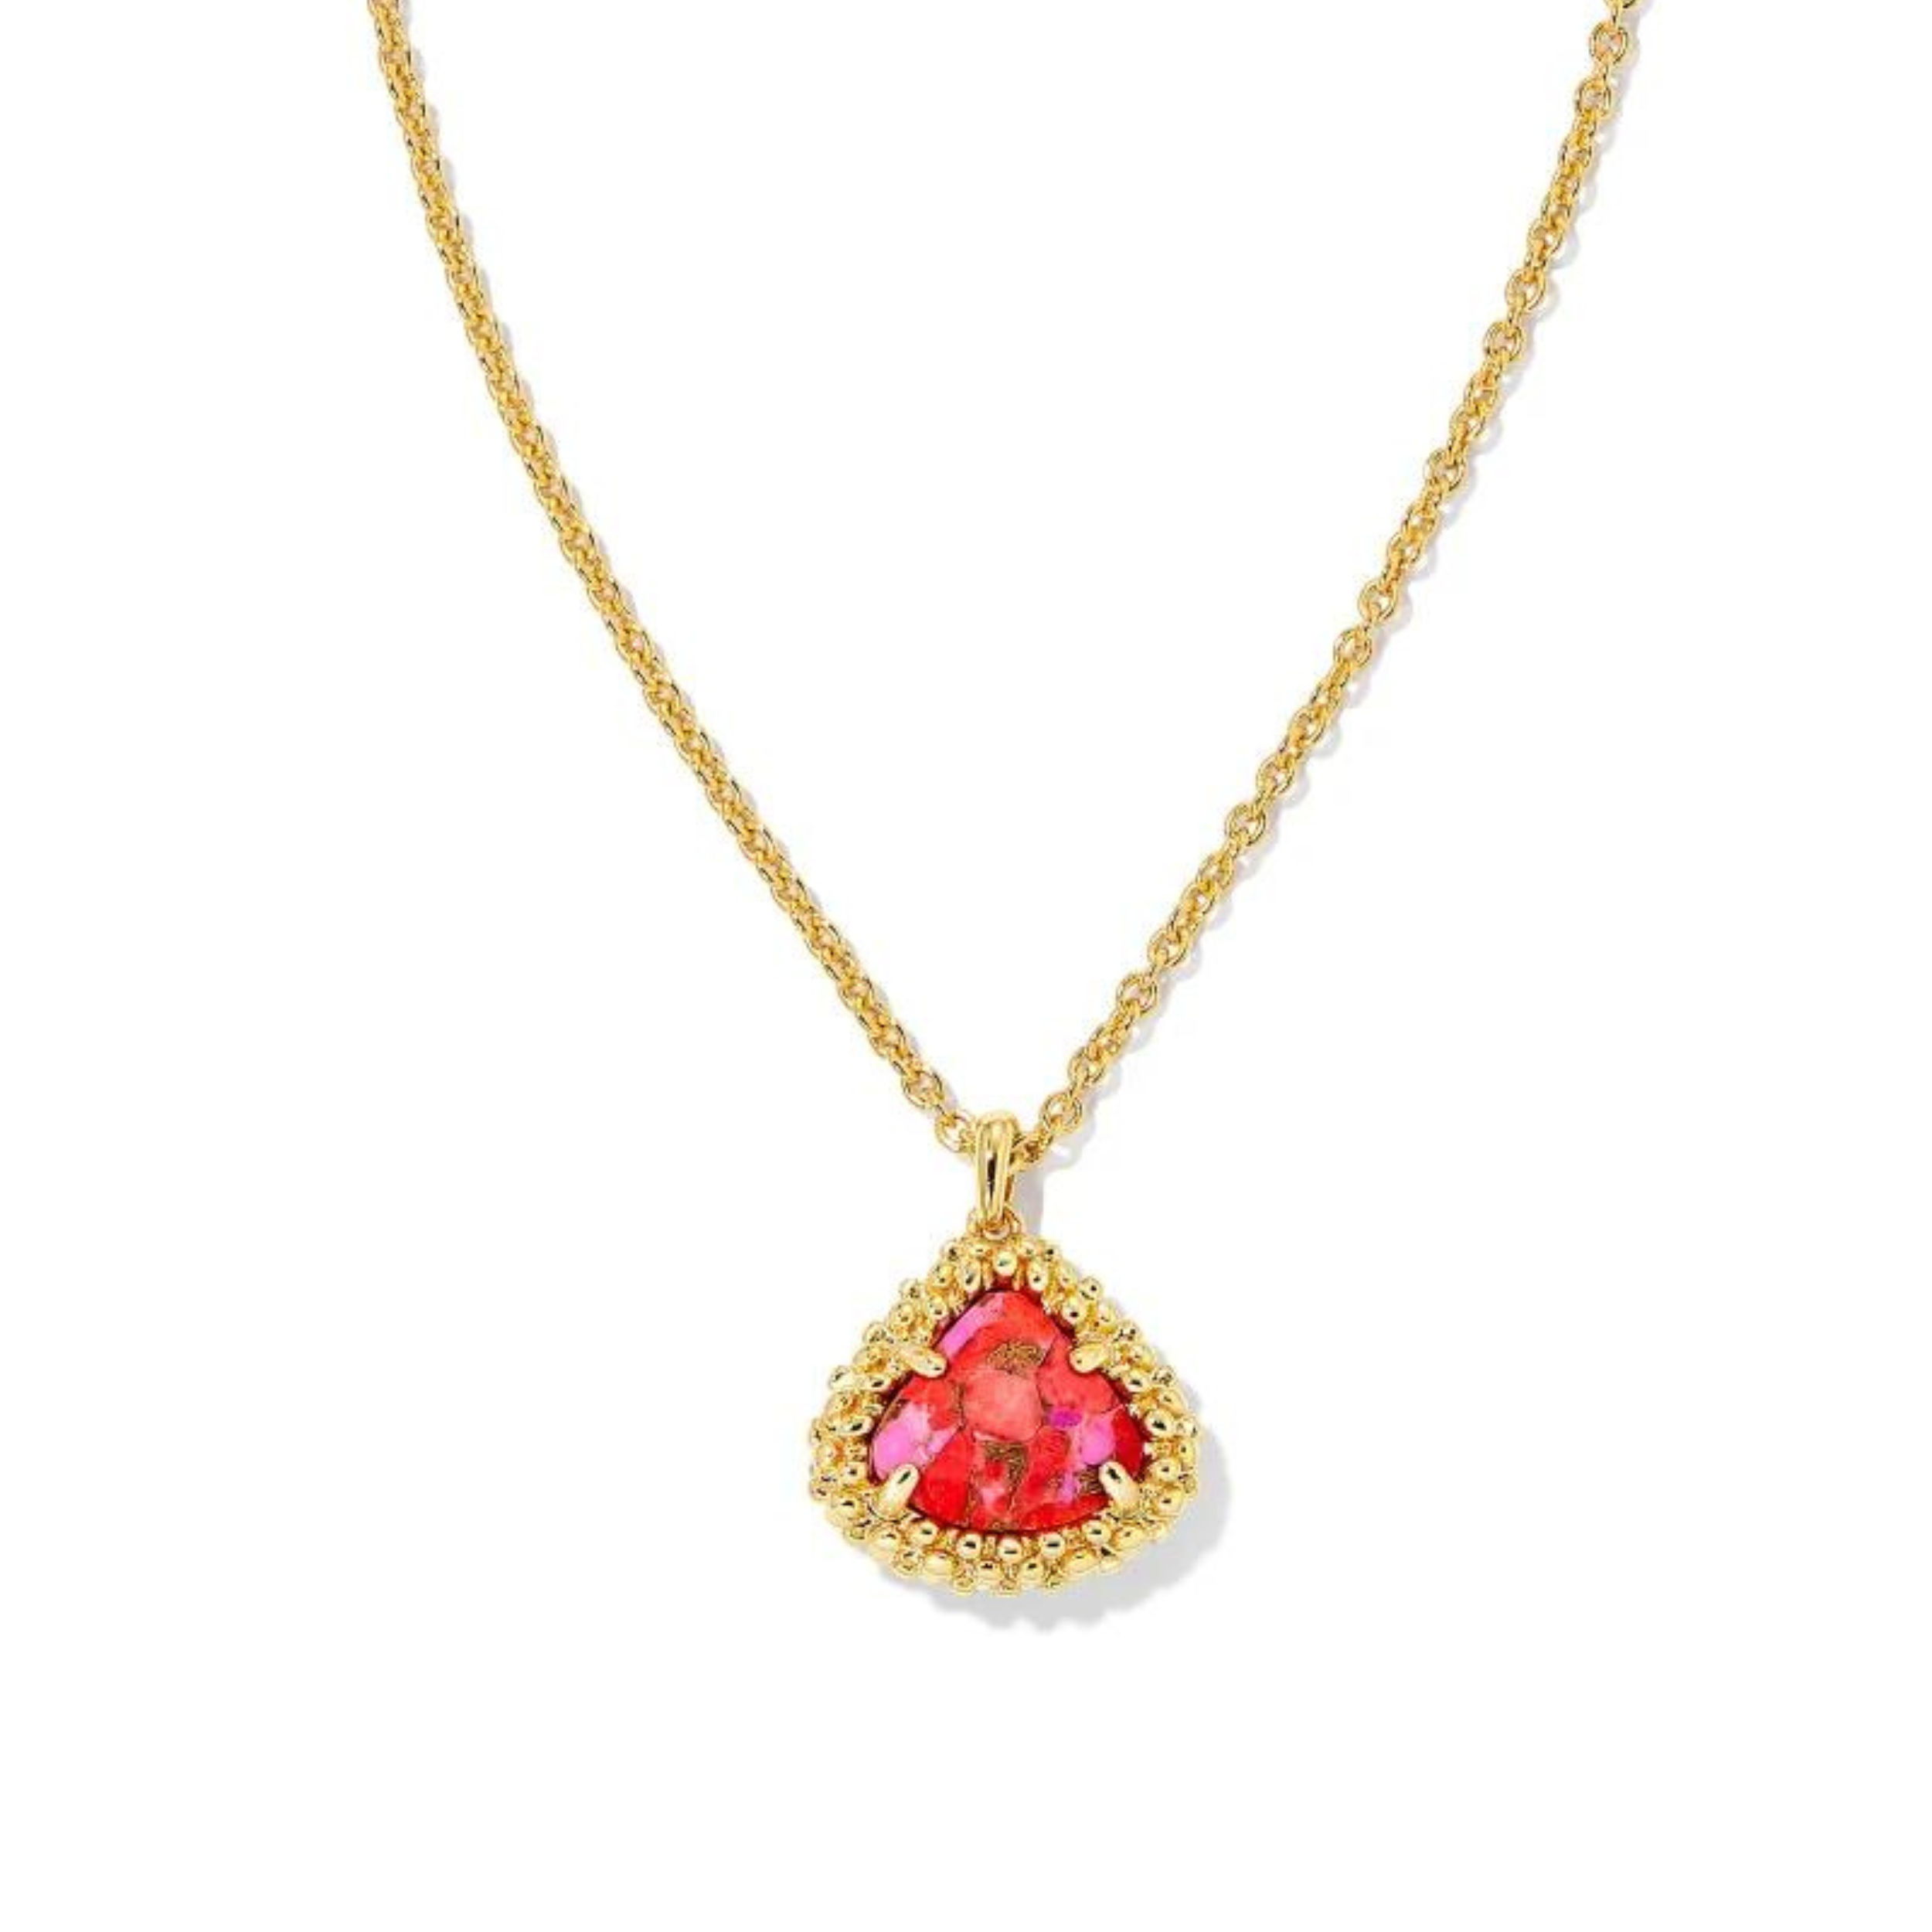 Kendra Scott | Framed Kendall Gold Short Pendant Necklace in Bronze Veined Red Fuchsia Magnesite. Pictured on a white background.